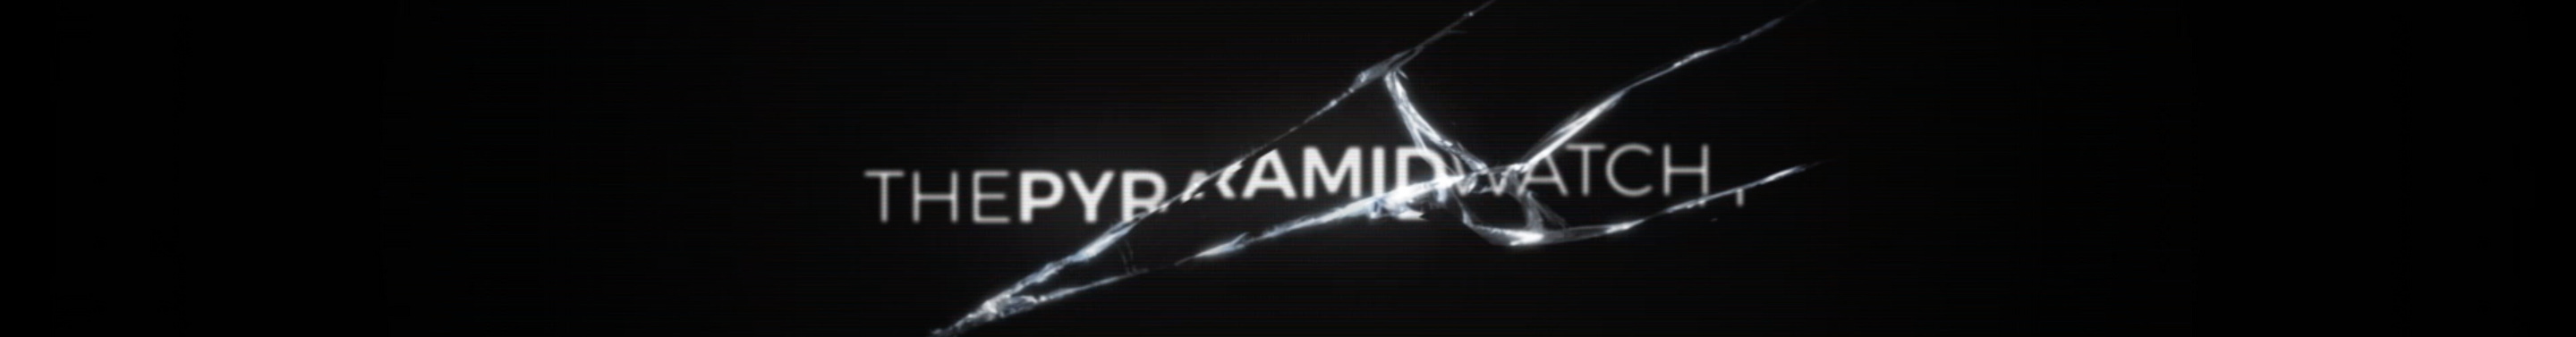 THE PYRAMID WATCHs profilbanner